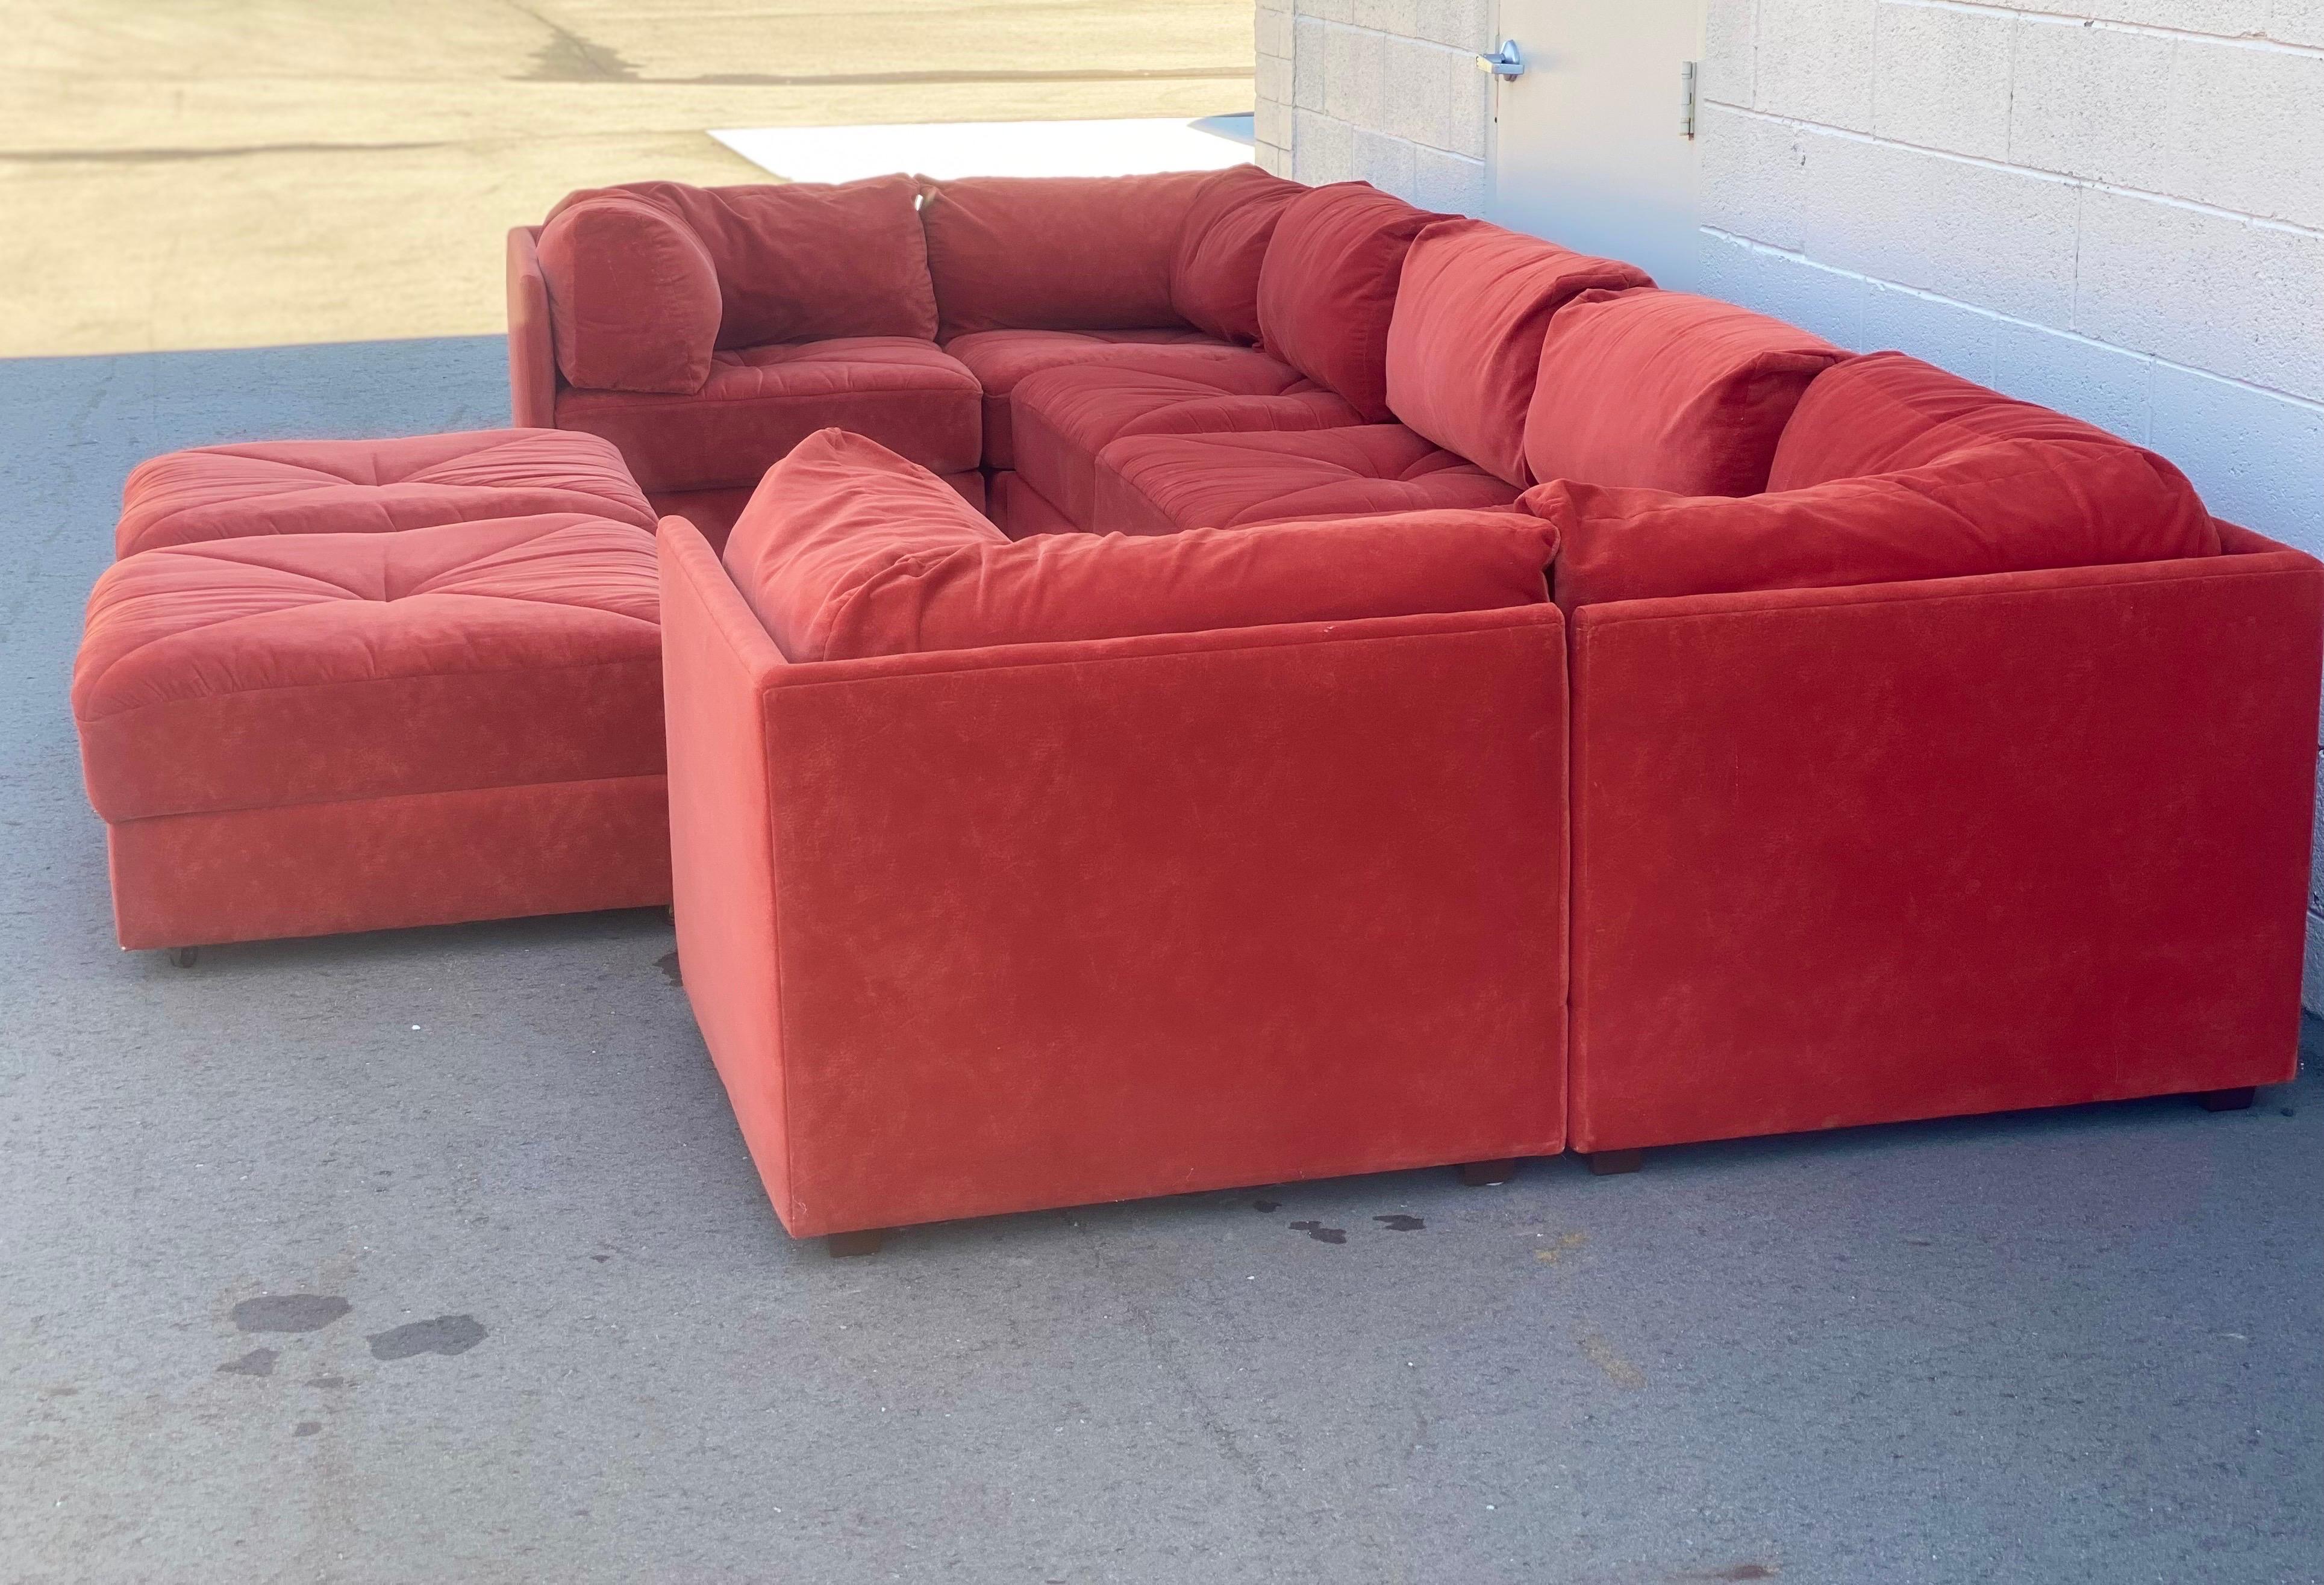 We are very pleased to offer a modern playpen sofa, circa the 1980s. Long, lean, and super comfortable, this ten-piece sectional lounges low to the floor, its modular design nods to the relaxed modernism of the mid-20th century. This versatile piece